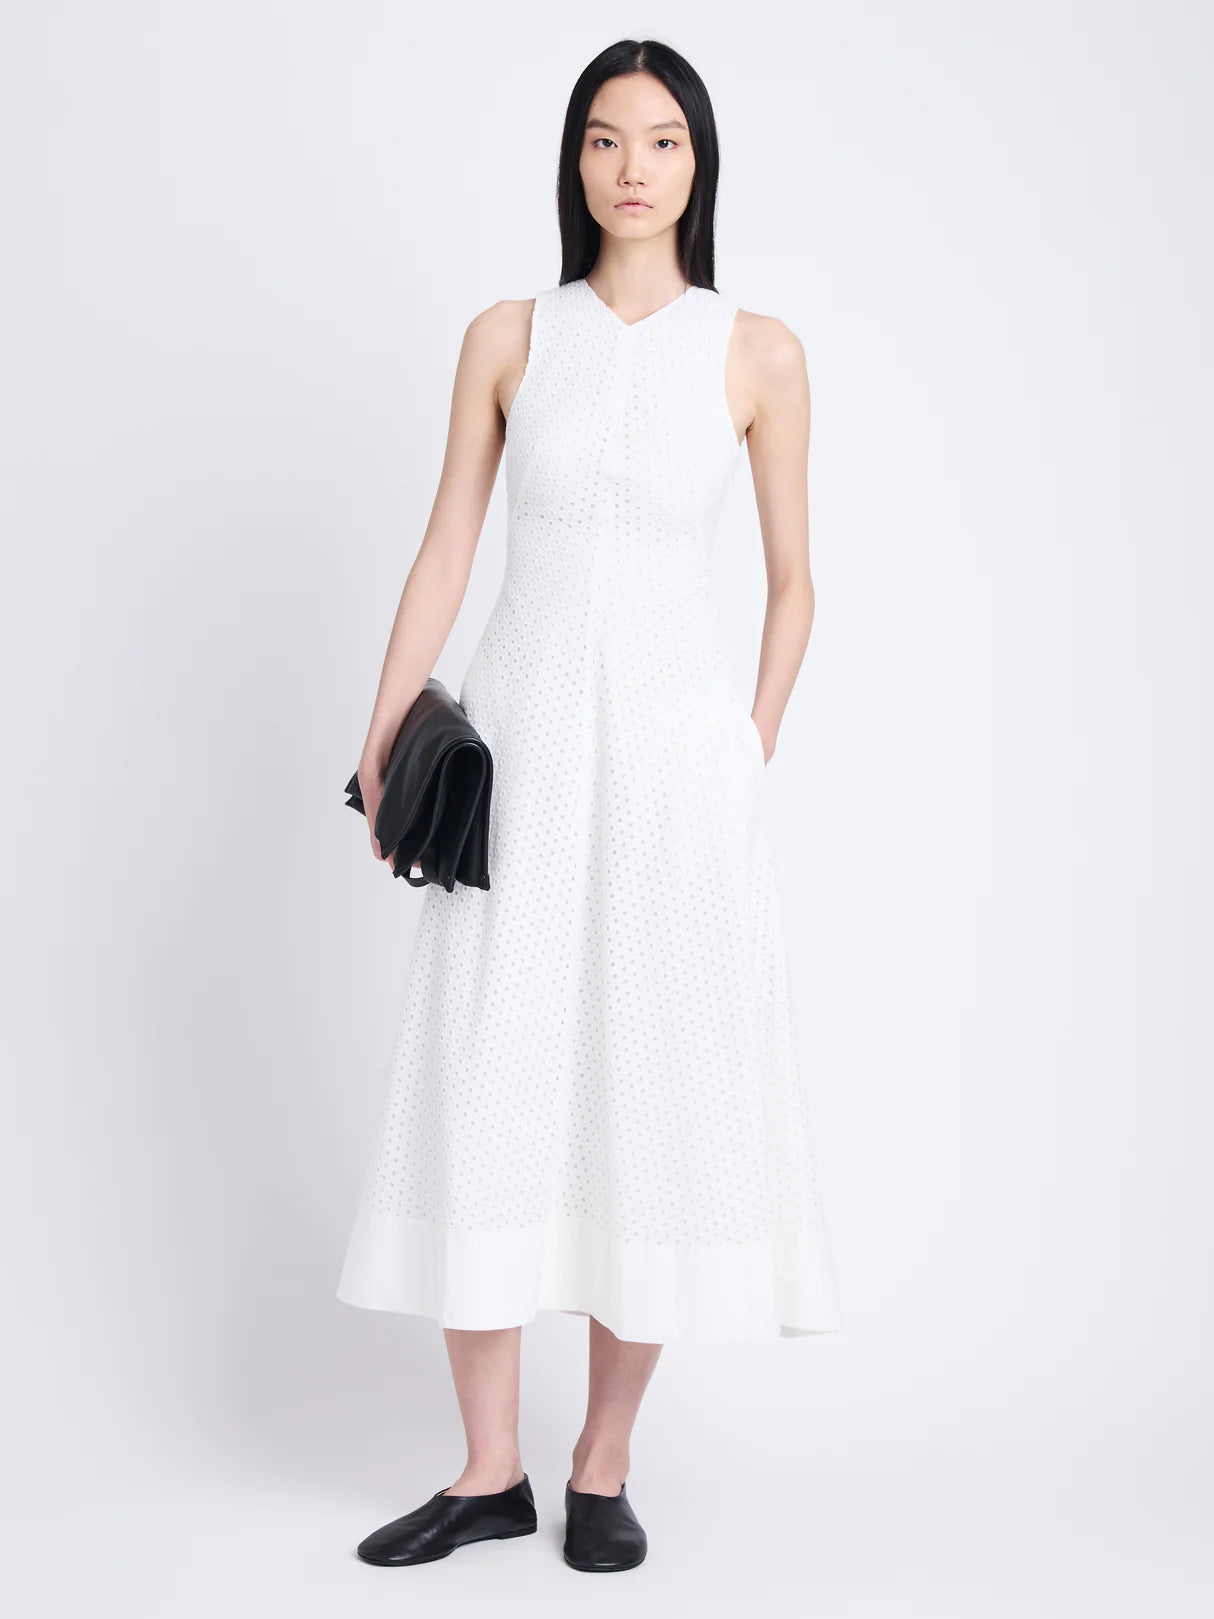 Juno Dress in Broderie Anglaise - Off White